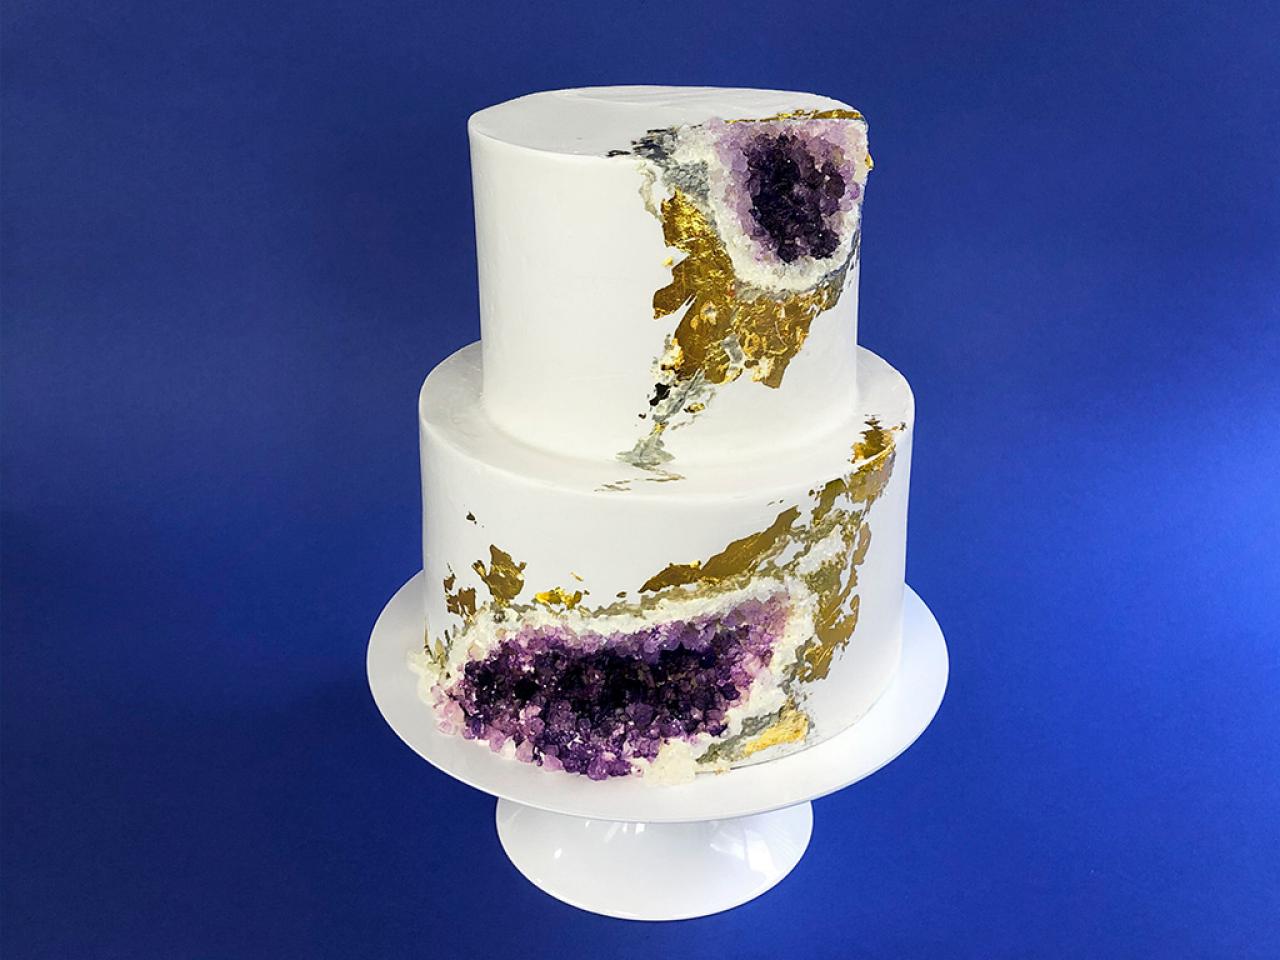 Vegan Treats - Geode cake complete with handmade edible crystals! The soft  serve is peanut butter and brownie batter! Save the dates: Saturday, Sept.  17th Phoenixville VegFest and Saturday, Sept. 24th DC